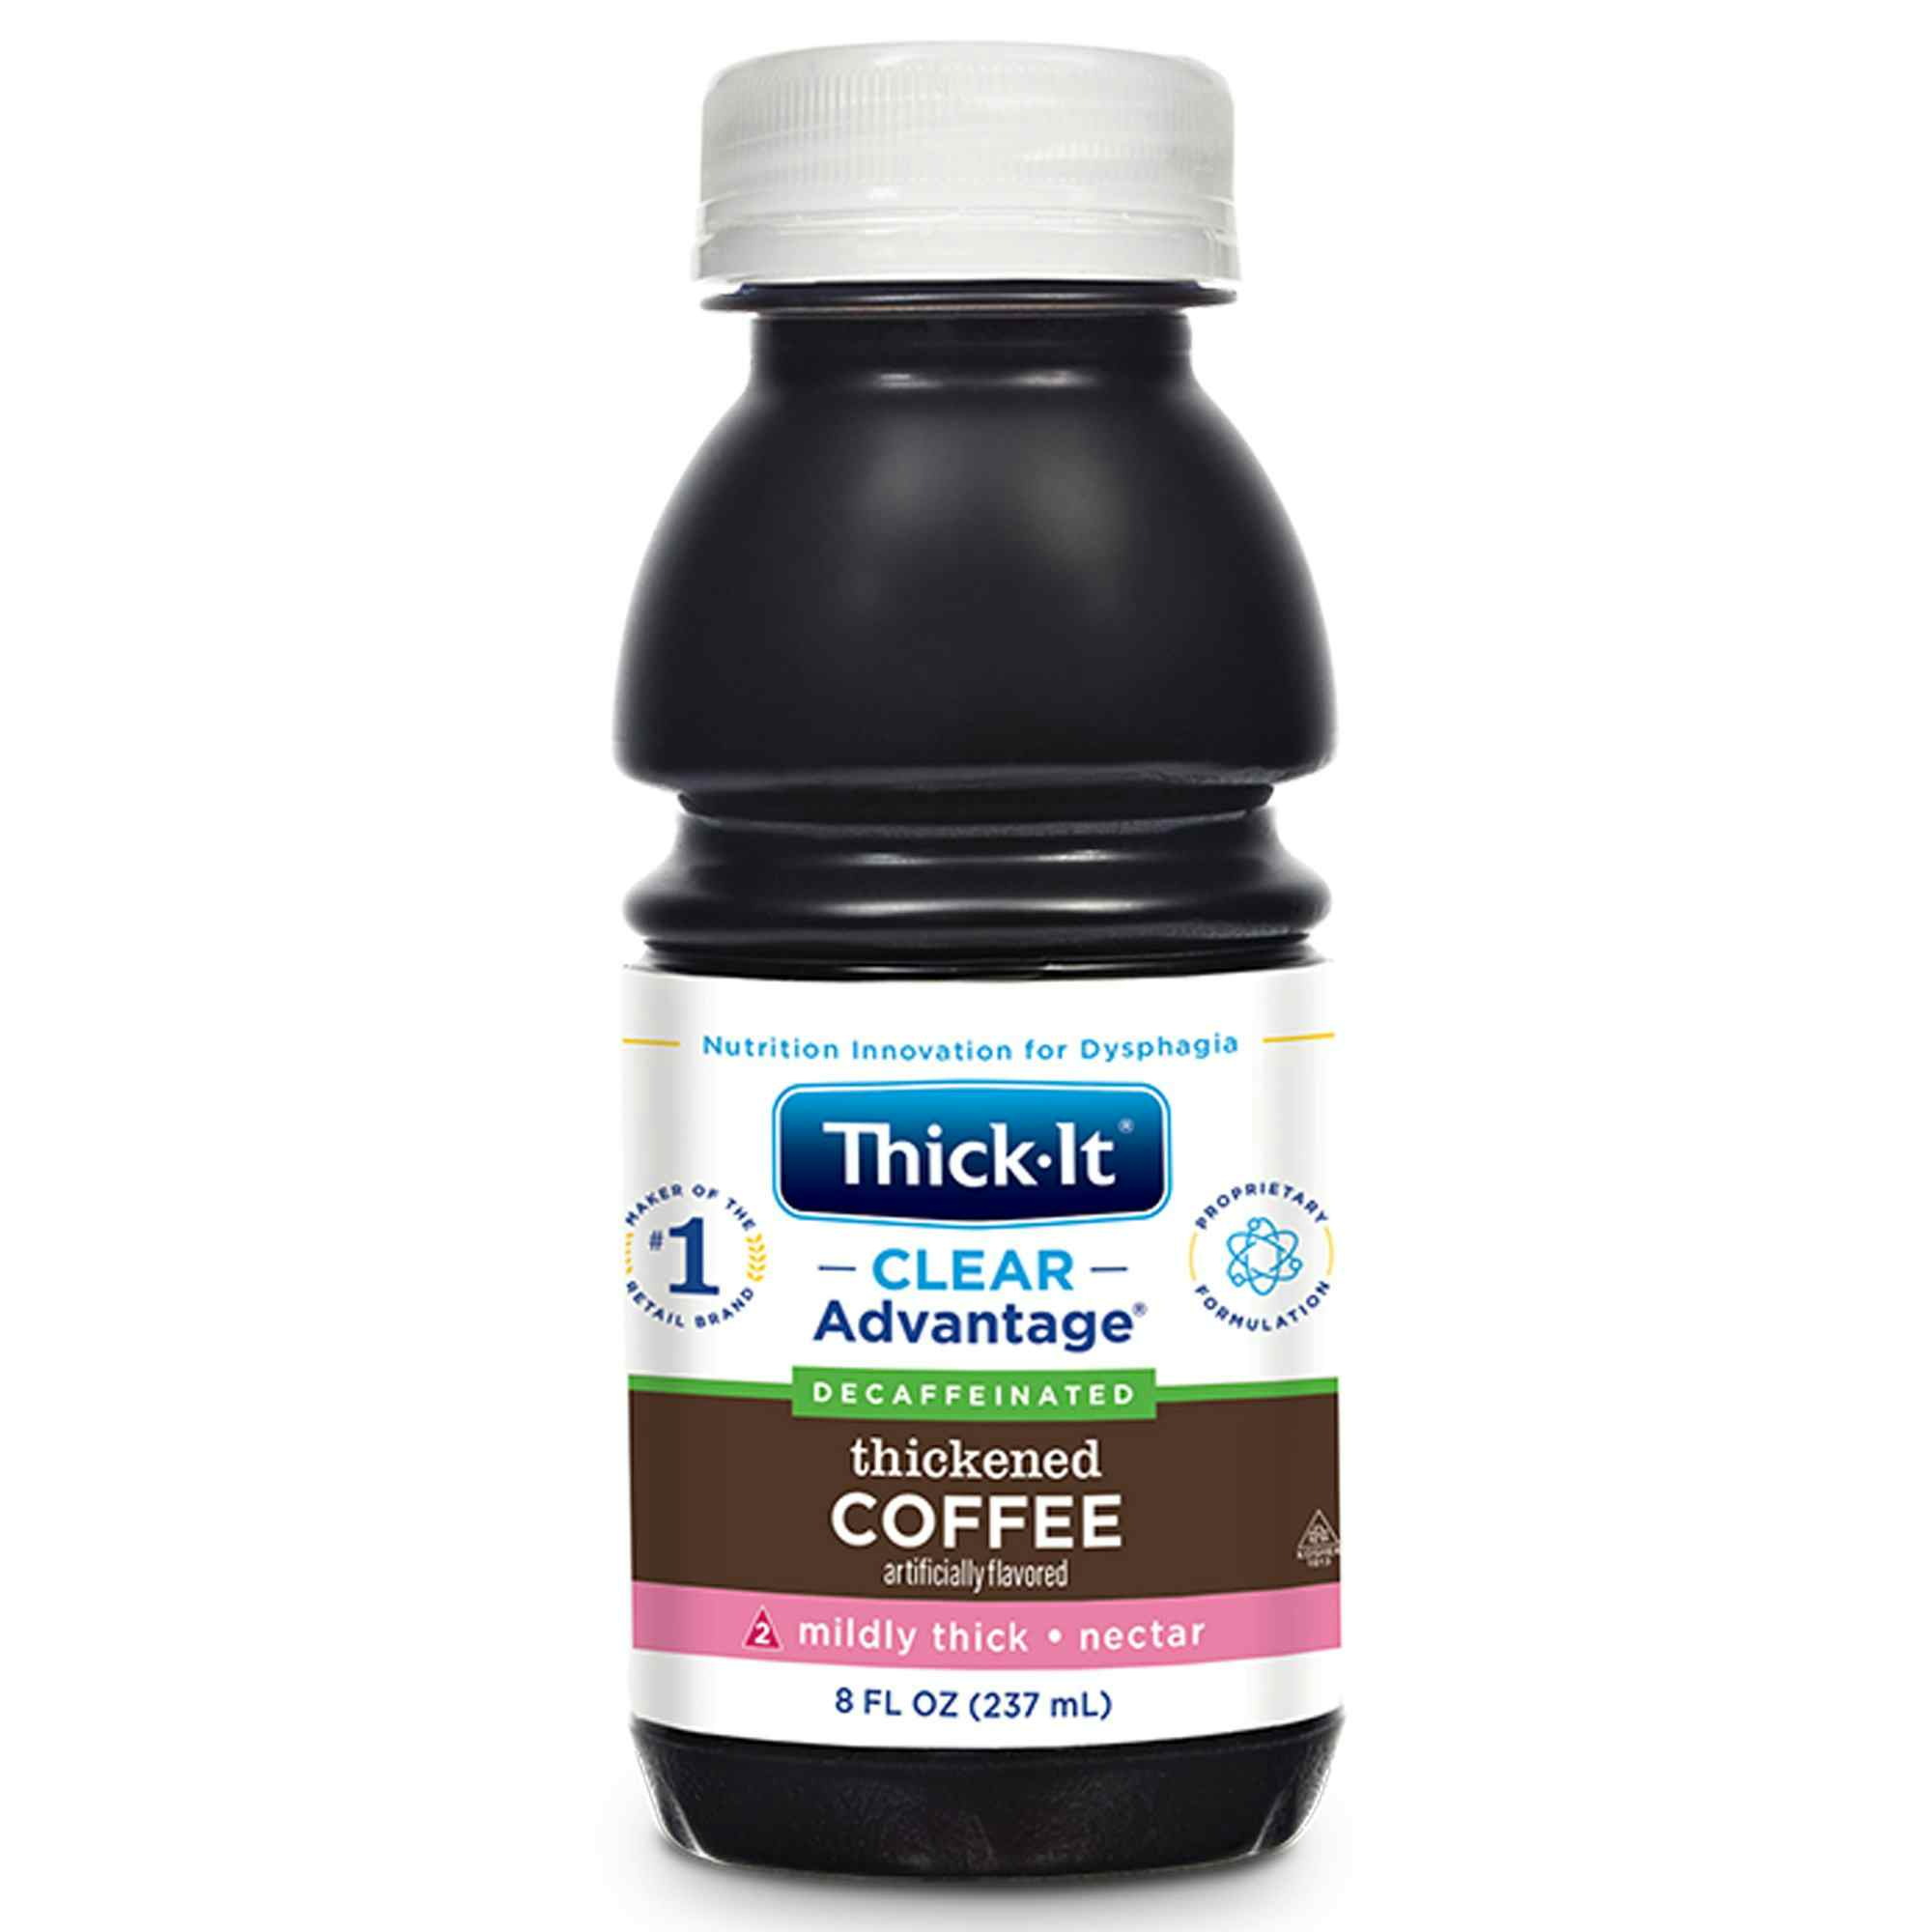 Thick-It Clear Advantage Decaffeinated Thickened Coffee, Mildly Thick, Nectar Consistency, B469-L9044, 8 oz. - Case of 24